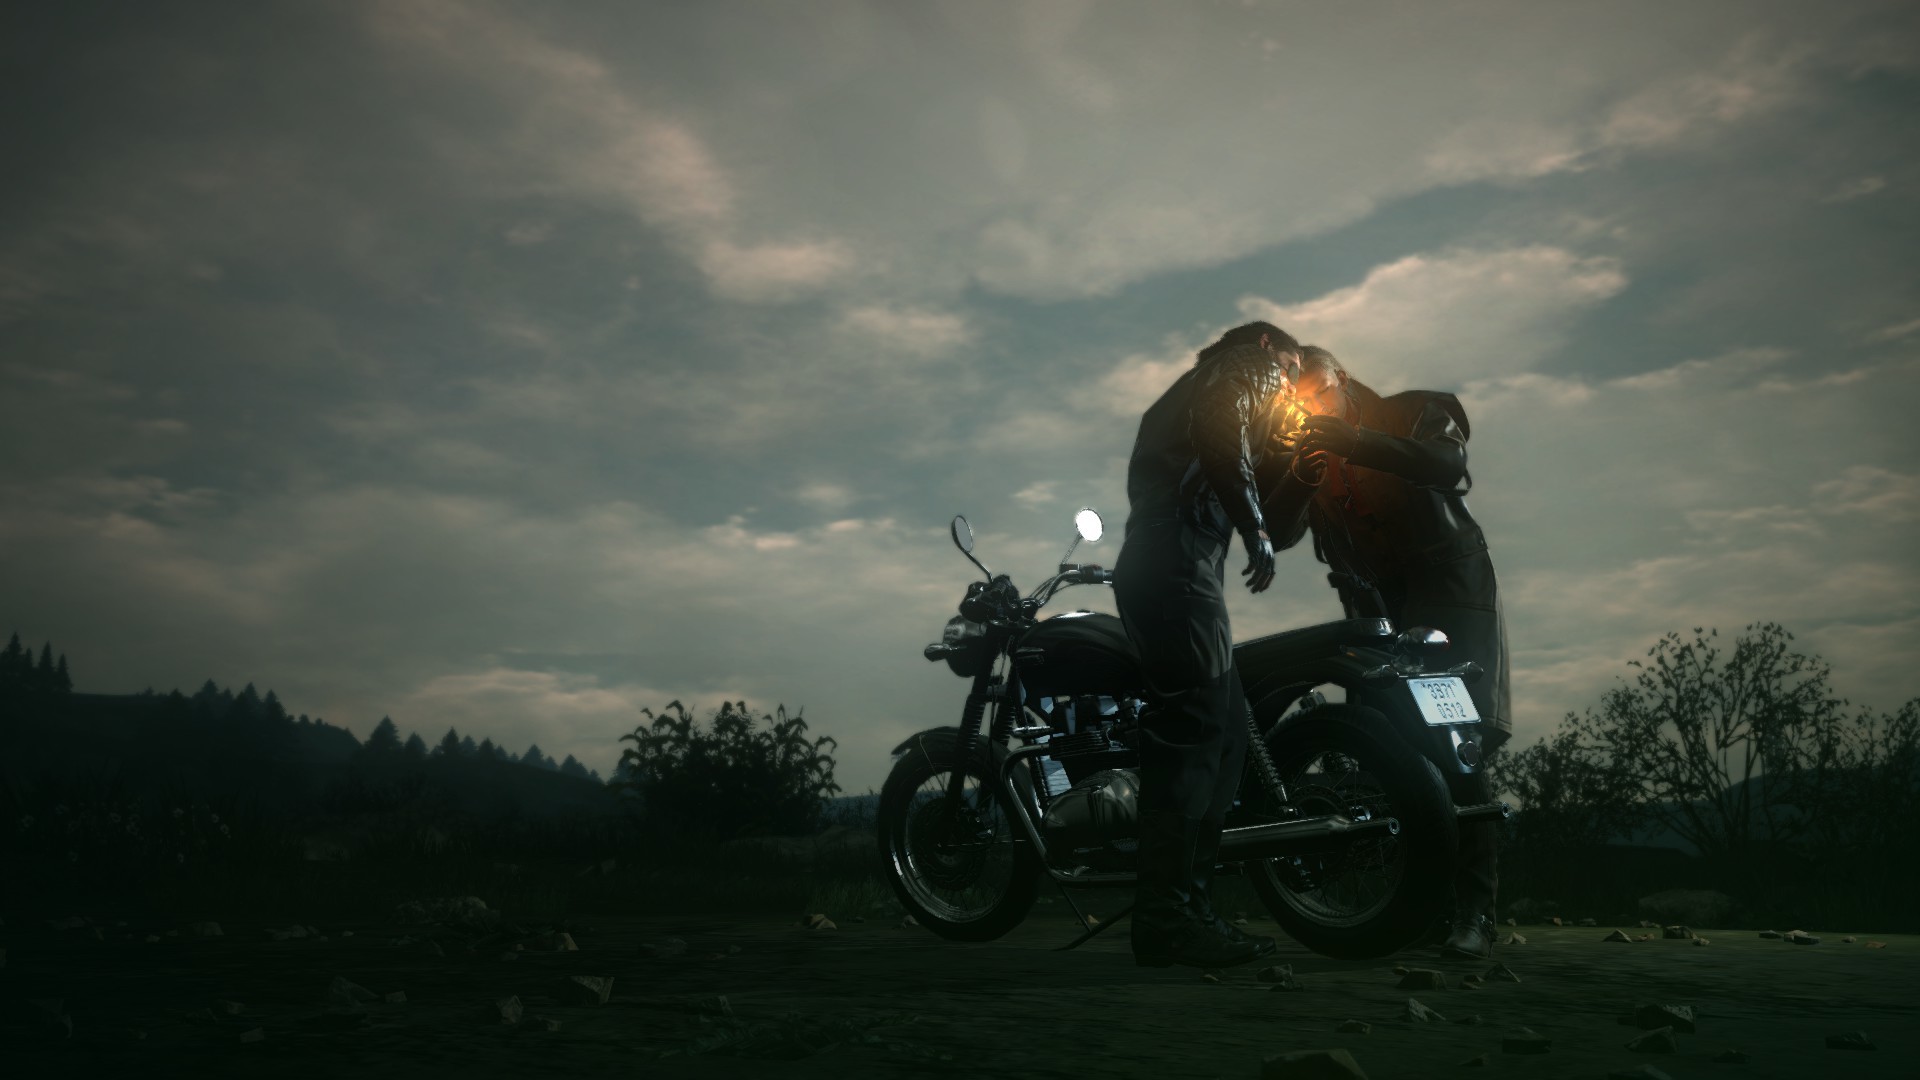 1920x1080 I Thought This Makes for a Good Wallpaper (Big Boss & Ocelot, Cigar &  Motorcycle)